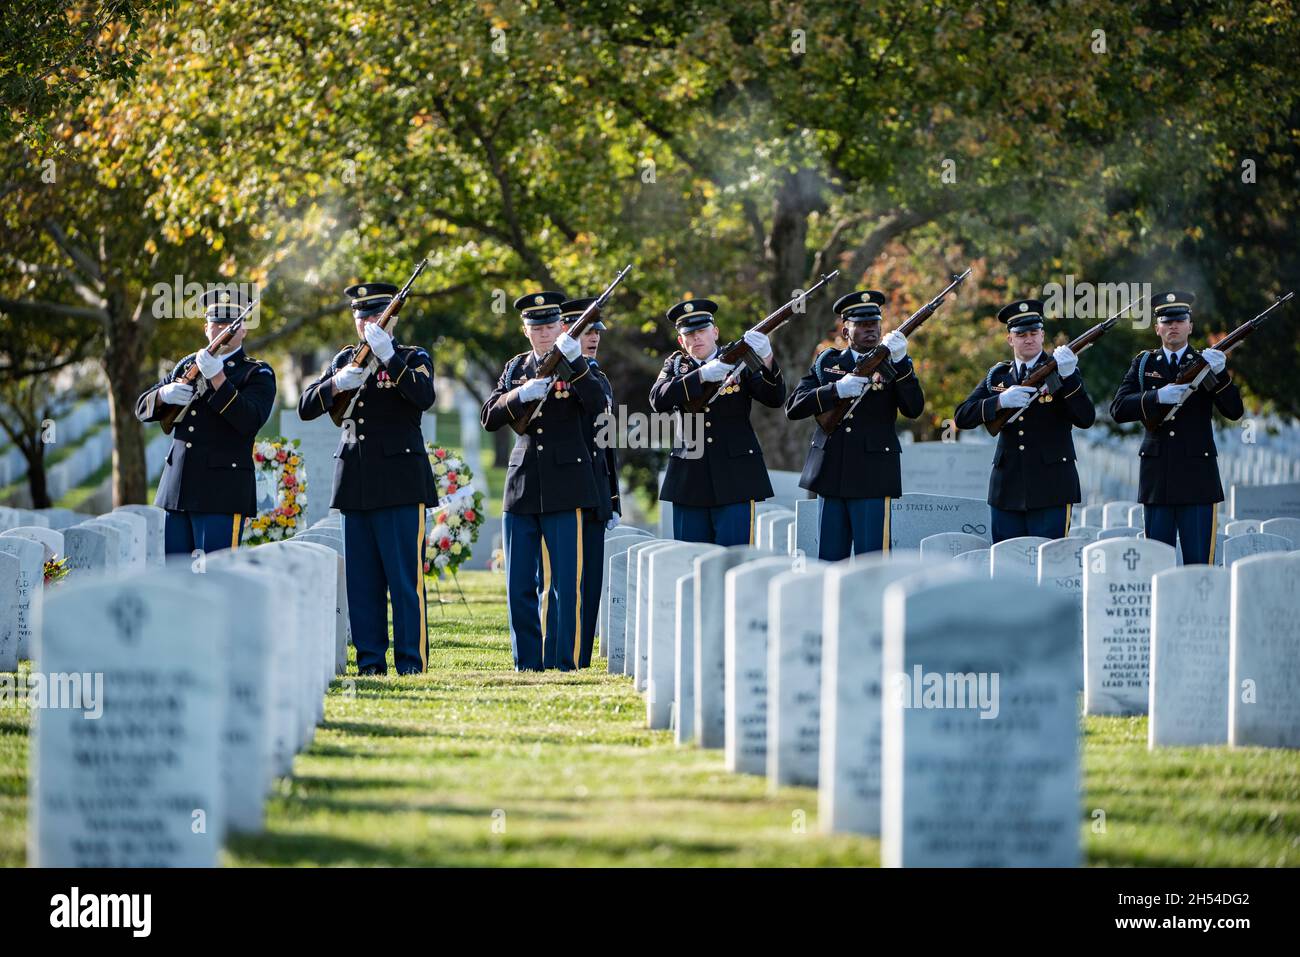 Arlington, United States. 05th Nov, 2021. U.S. Army 3rd Infantry Regiment honor guards fire 3-rifle volleys in honor of former U.S. Secretary of State Gen. Colin Powell during the full honors interment ceremony at Arlington National Cemetery, November 5, 2021 in Arlington, Virginia. Credit: Elizabeth Fraser/DOD Photo/Alamy Live News Stock Photo